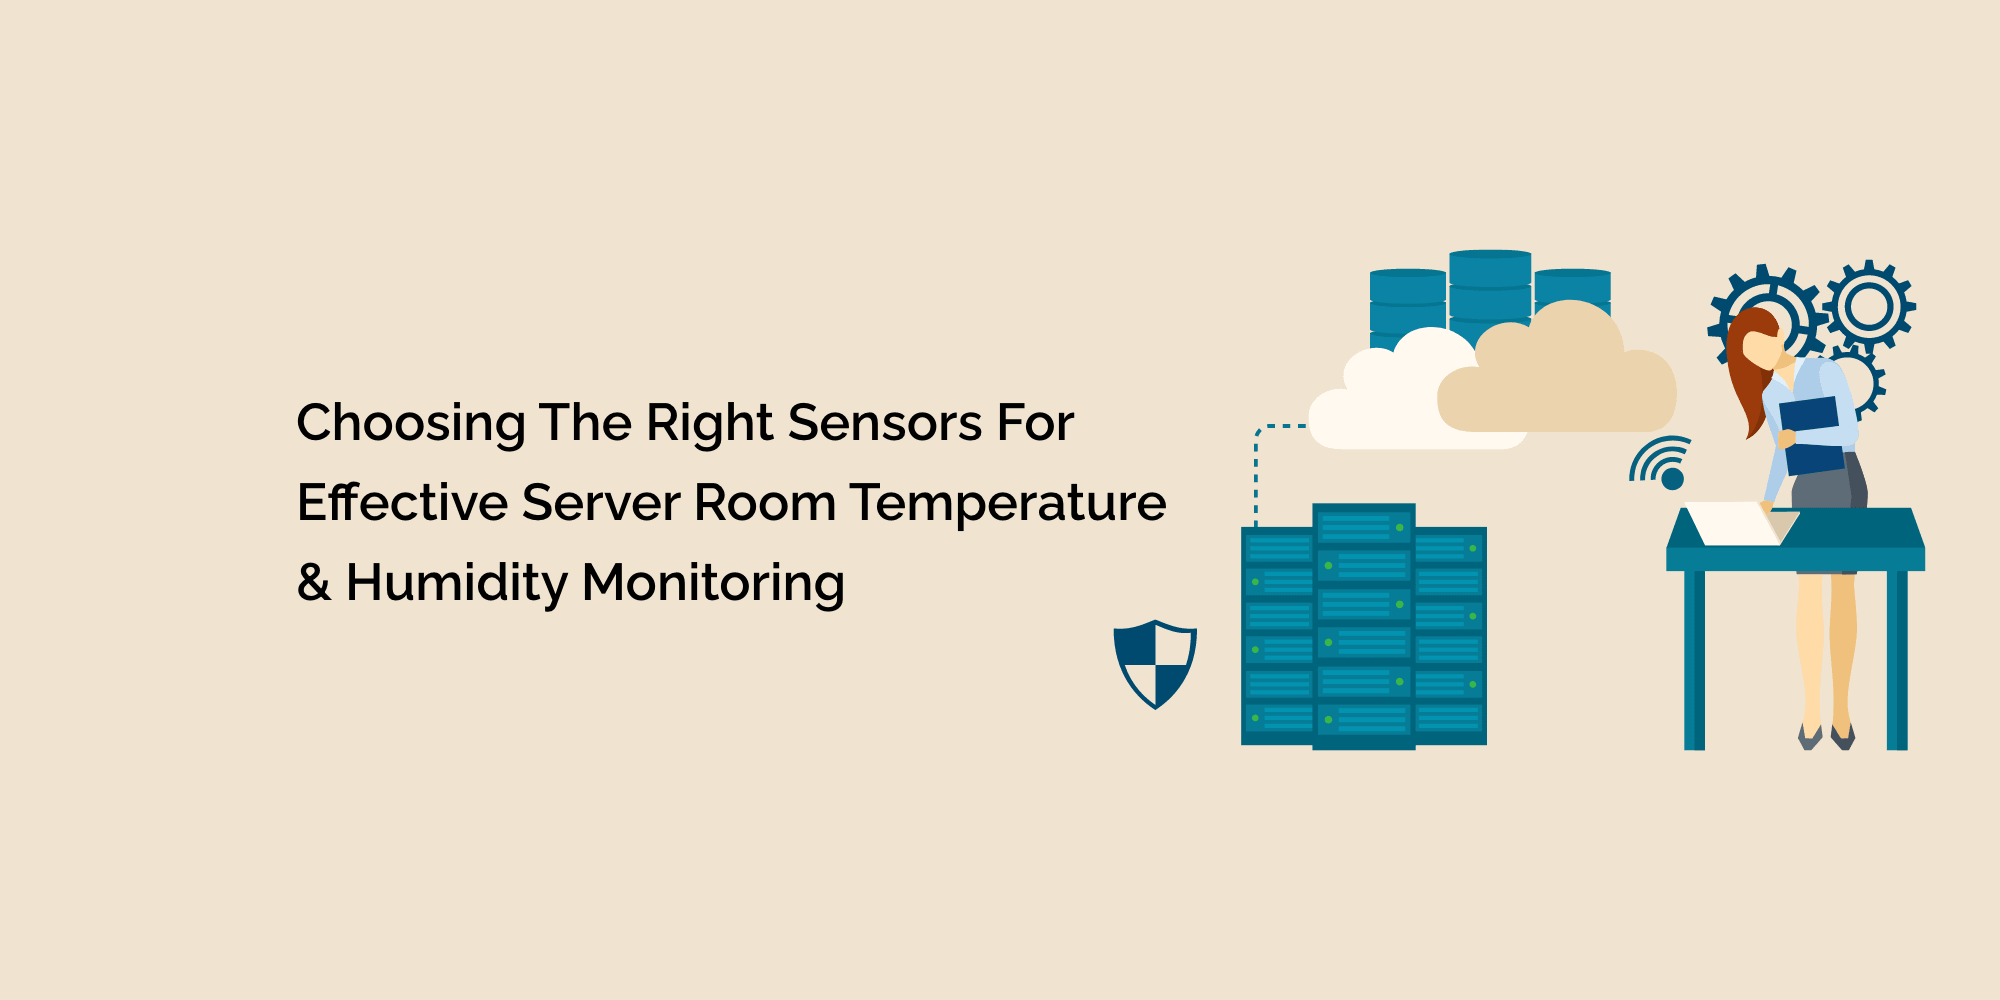 Choosing the Right Sensors for Effective Server Room Temperature & Humidity Monitoring